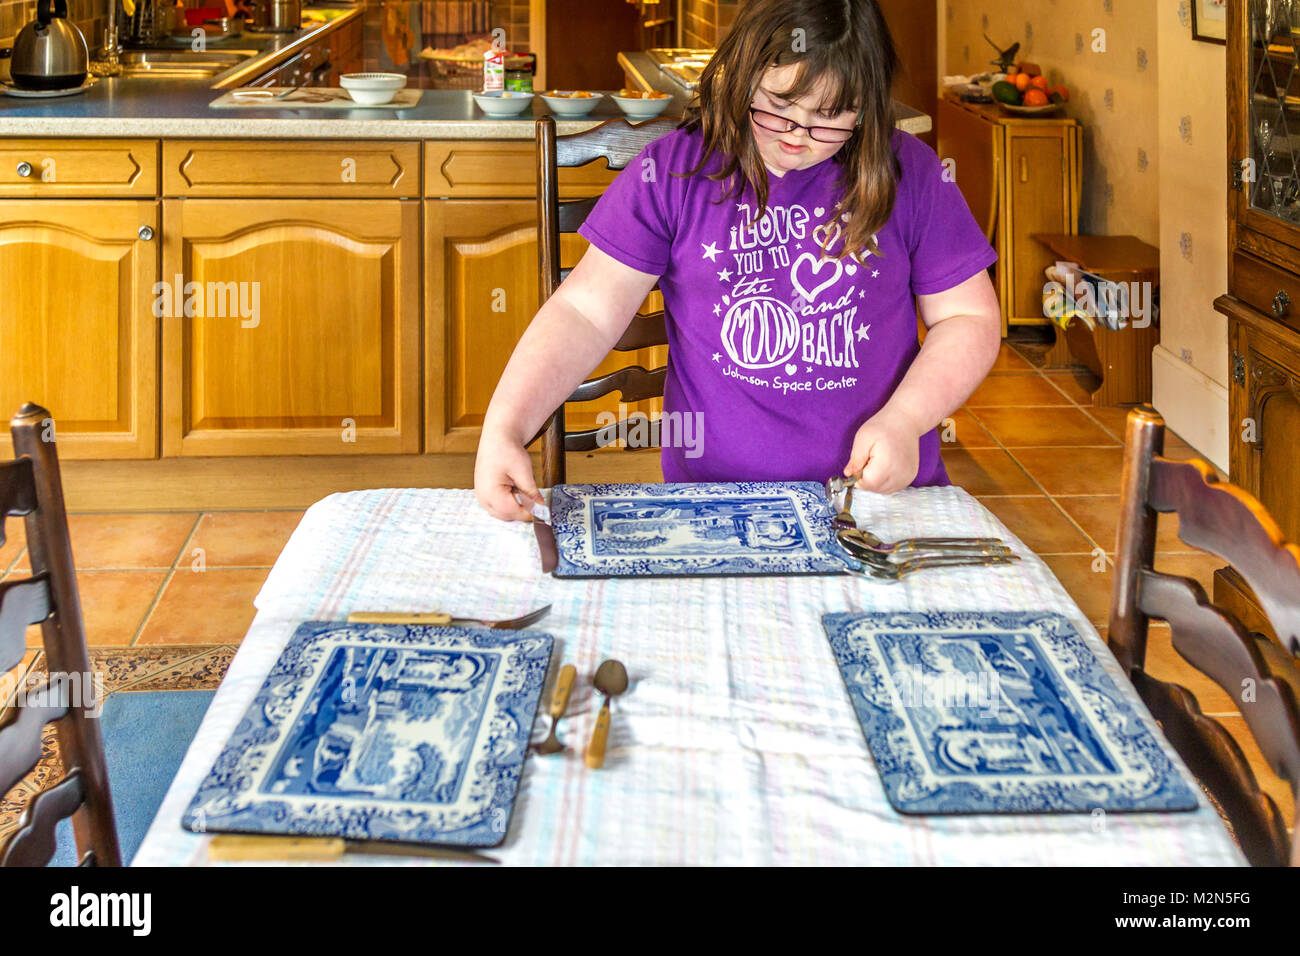 Children setting table hi-res stock photography and images - Alamy